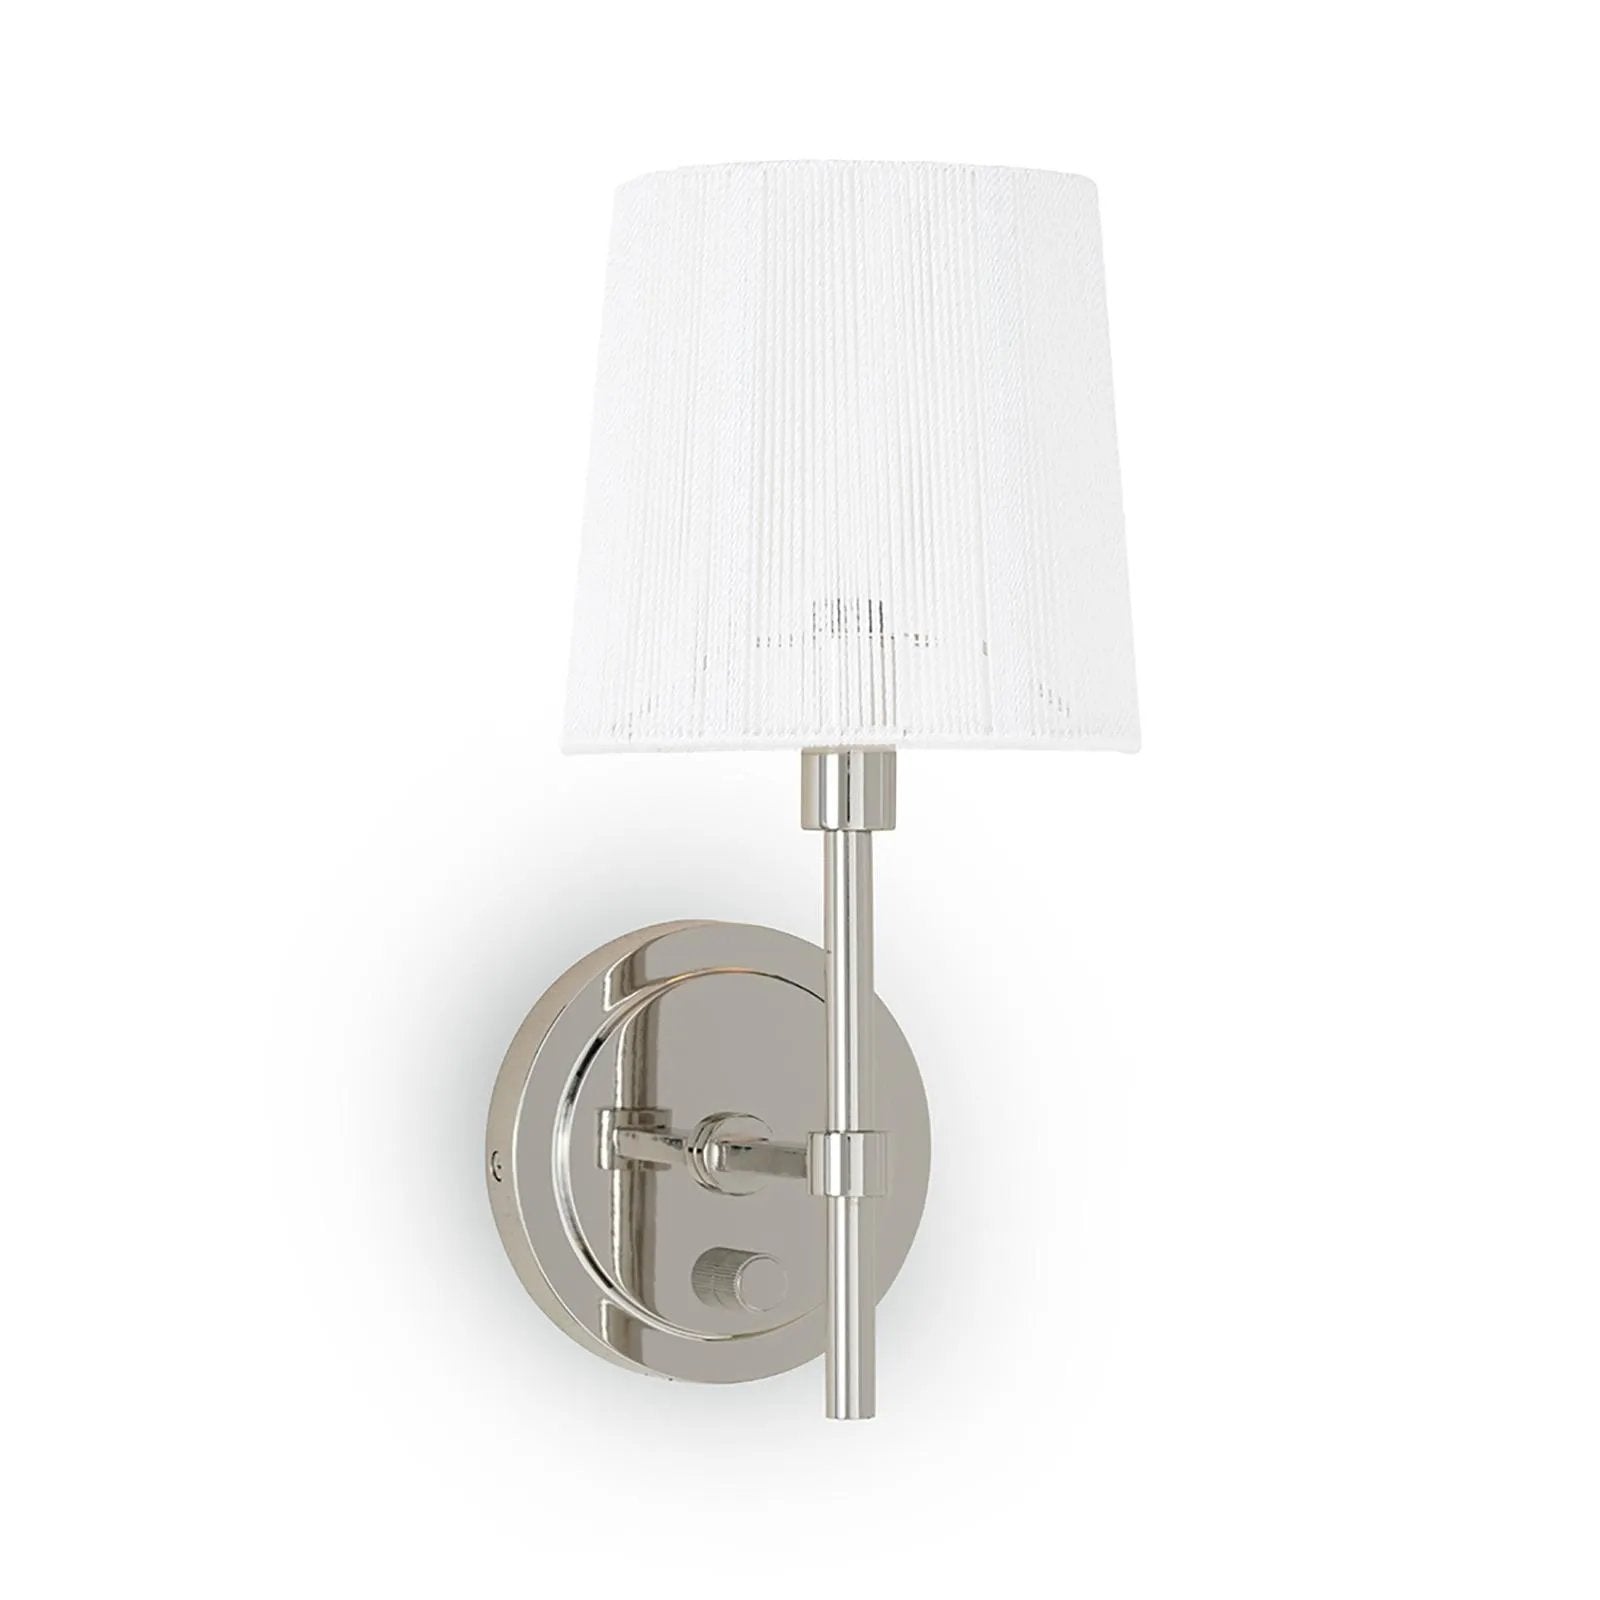 The Franklin Sconce is a harmonious blend of classic and femininity with the added utility of a dimmer knob on its backplate. Adding a touch of tactile intrigue through its unique string lamp shade, the Franklin Sconce is the perfect addition to a powder room or as a pair on either side of a bed. Amethyst Home provides interior design, new home construction design consulting, vintage area rugs, and lighting in the Calabasas metro area.